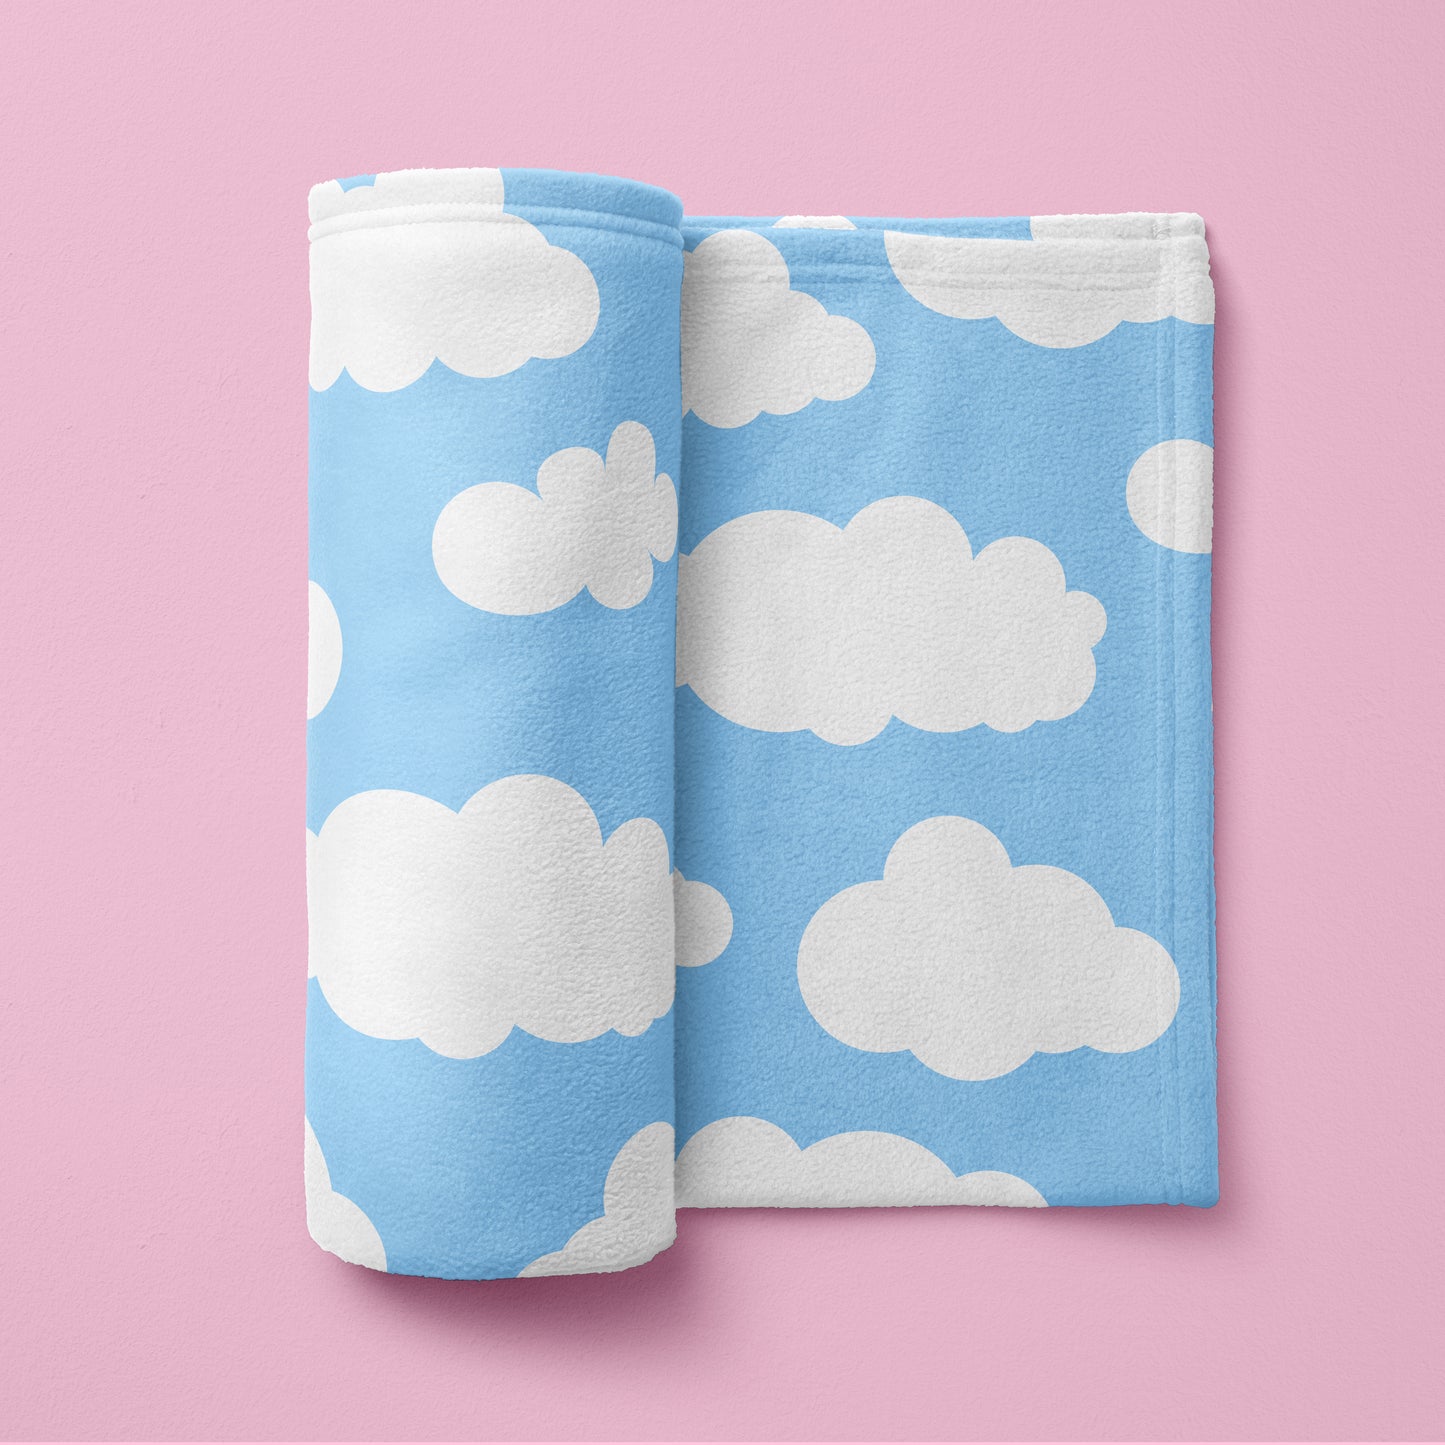 OVERSIZED CLOUDS BLANKET